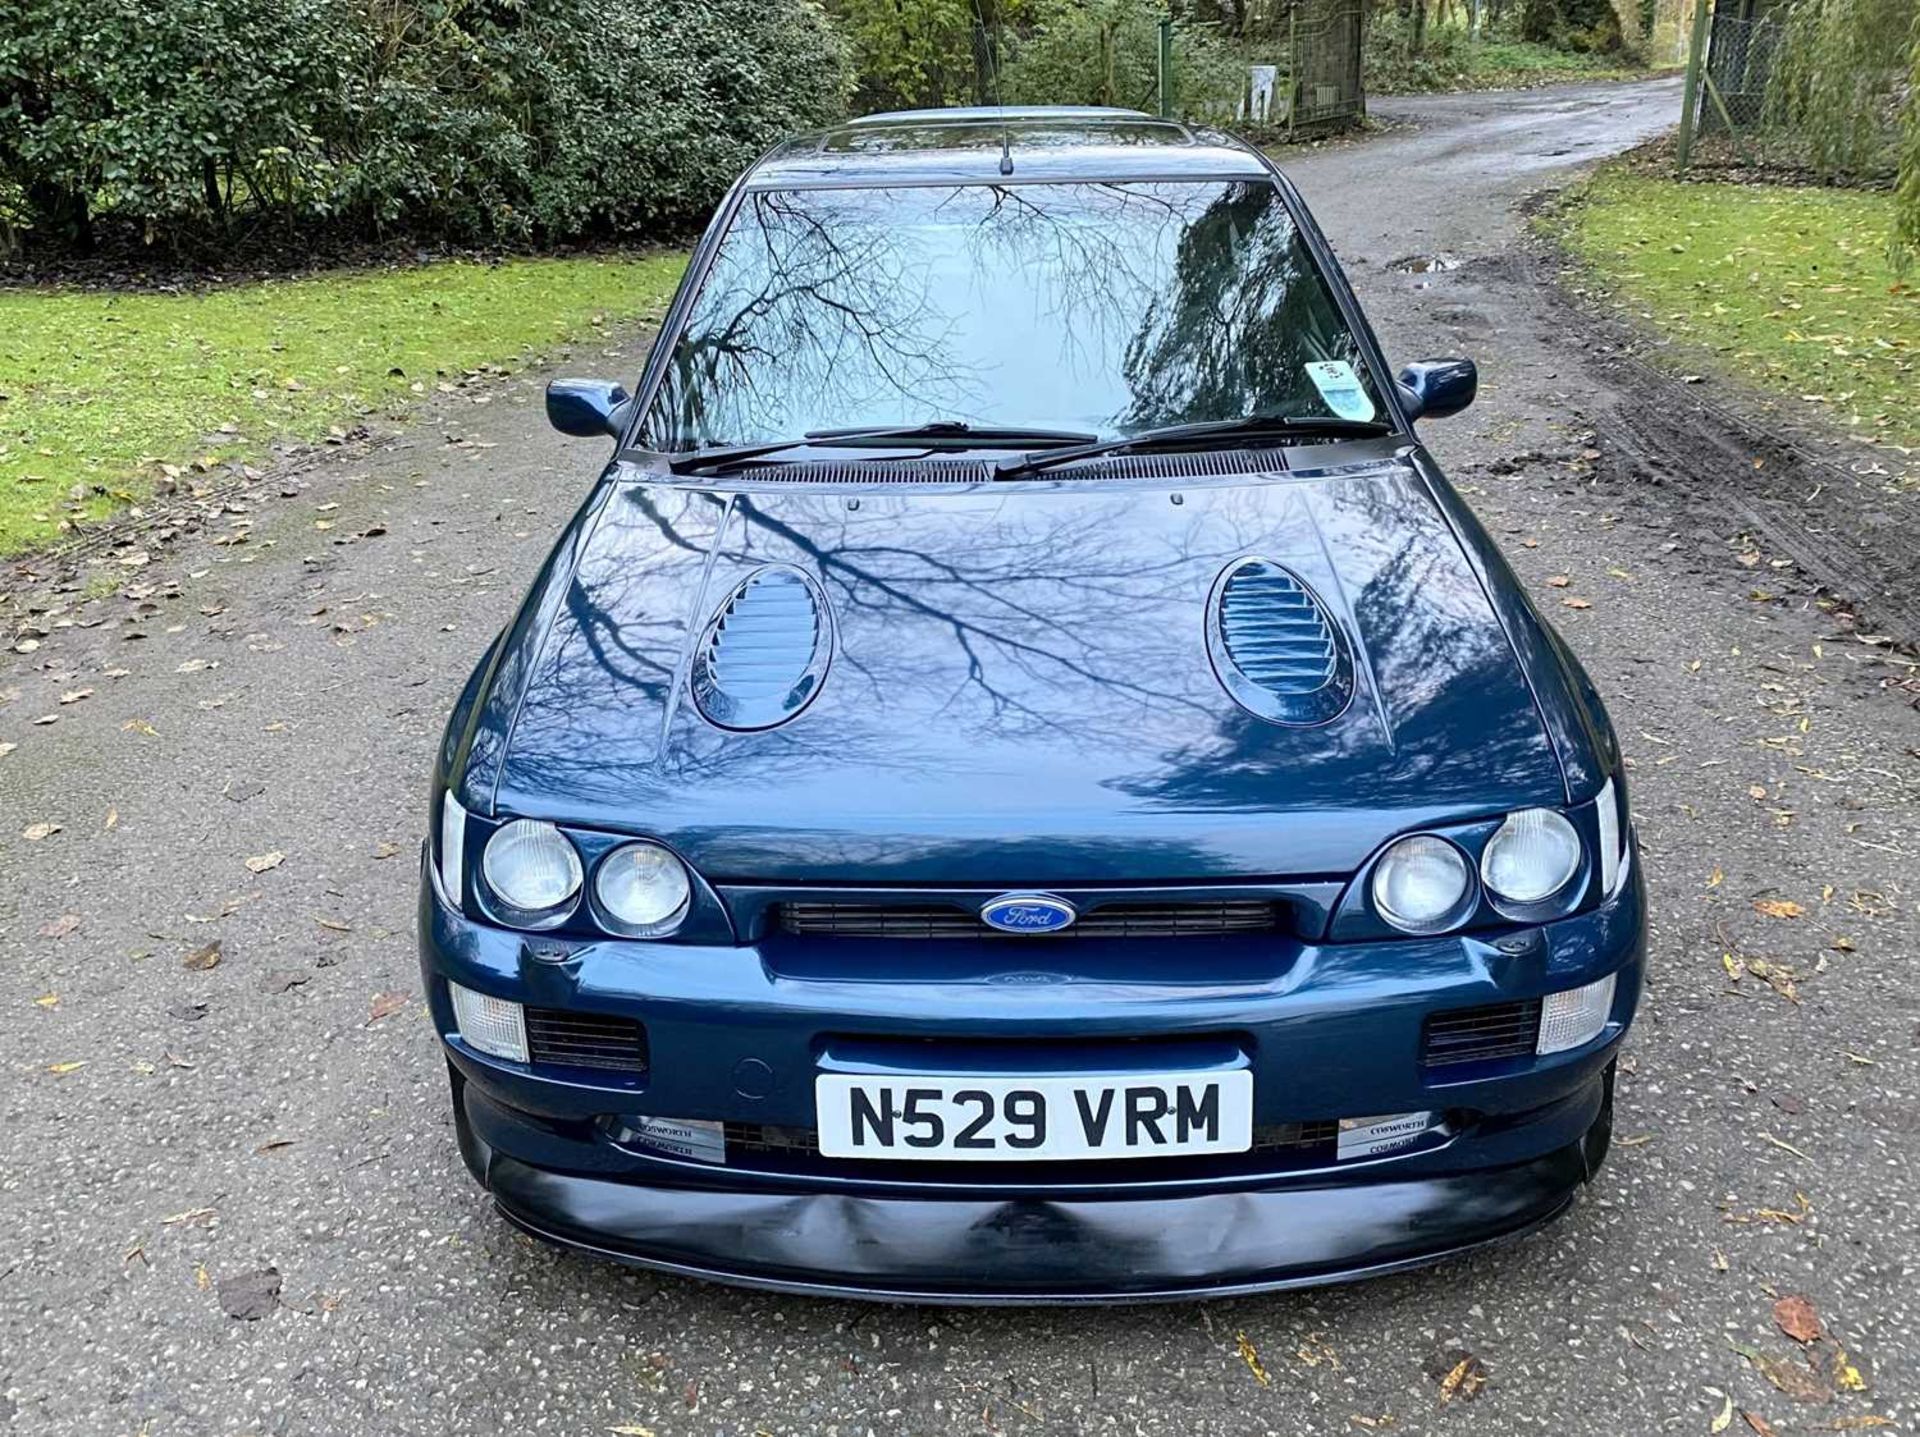 1995 Ford Escort RS Cosworth LUX Only 56,000 miles, finished in rare Petrol Blue - Image 14 of 98